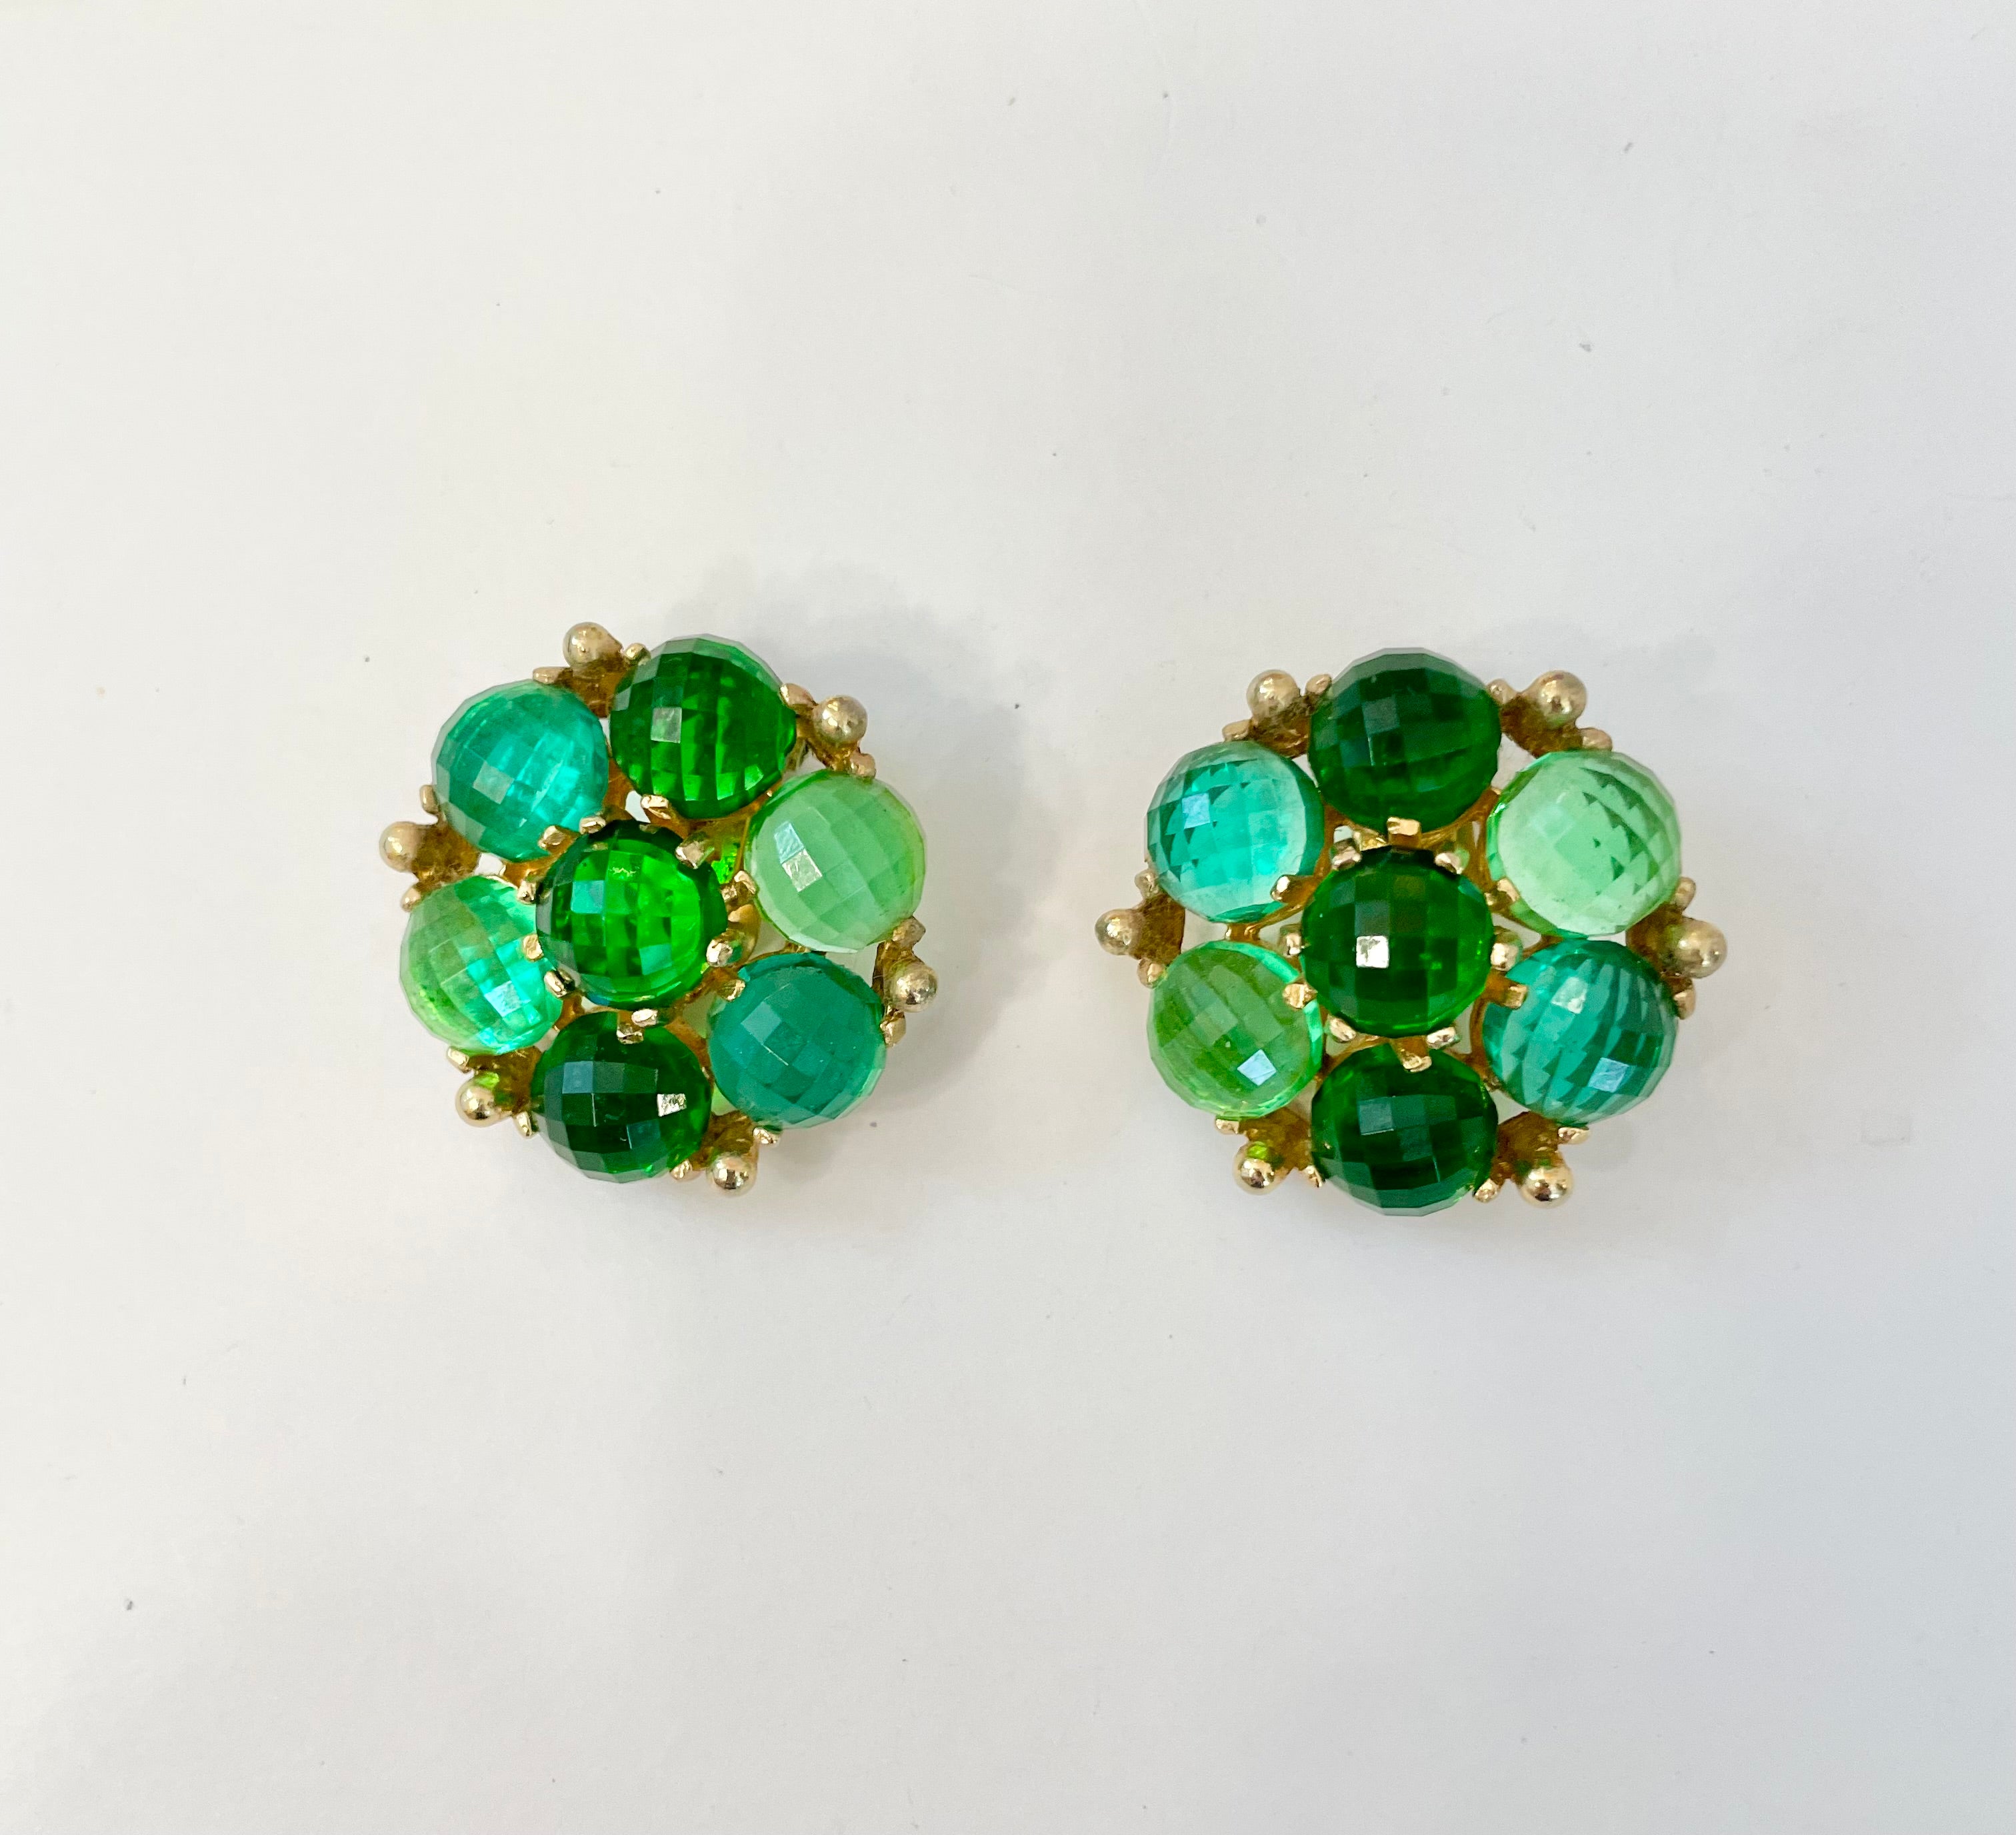 The most divine emerald cluster earrings.... so extraordinary!